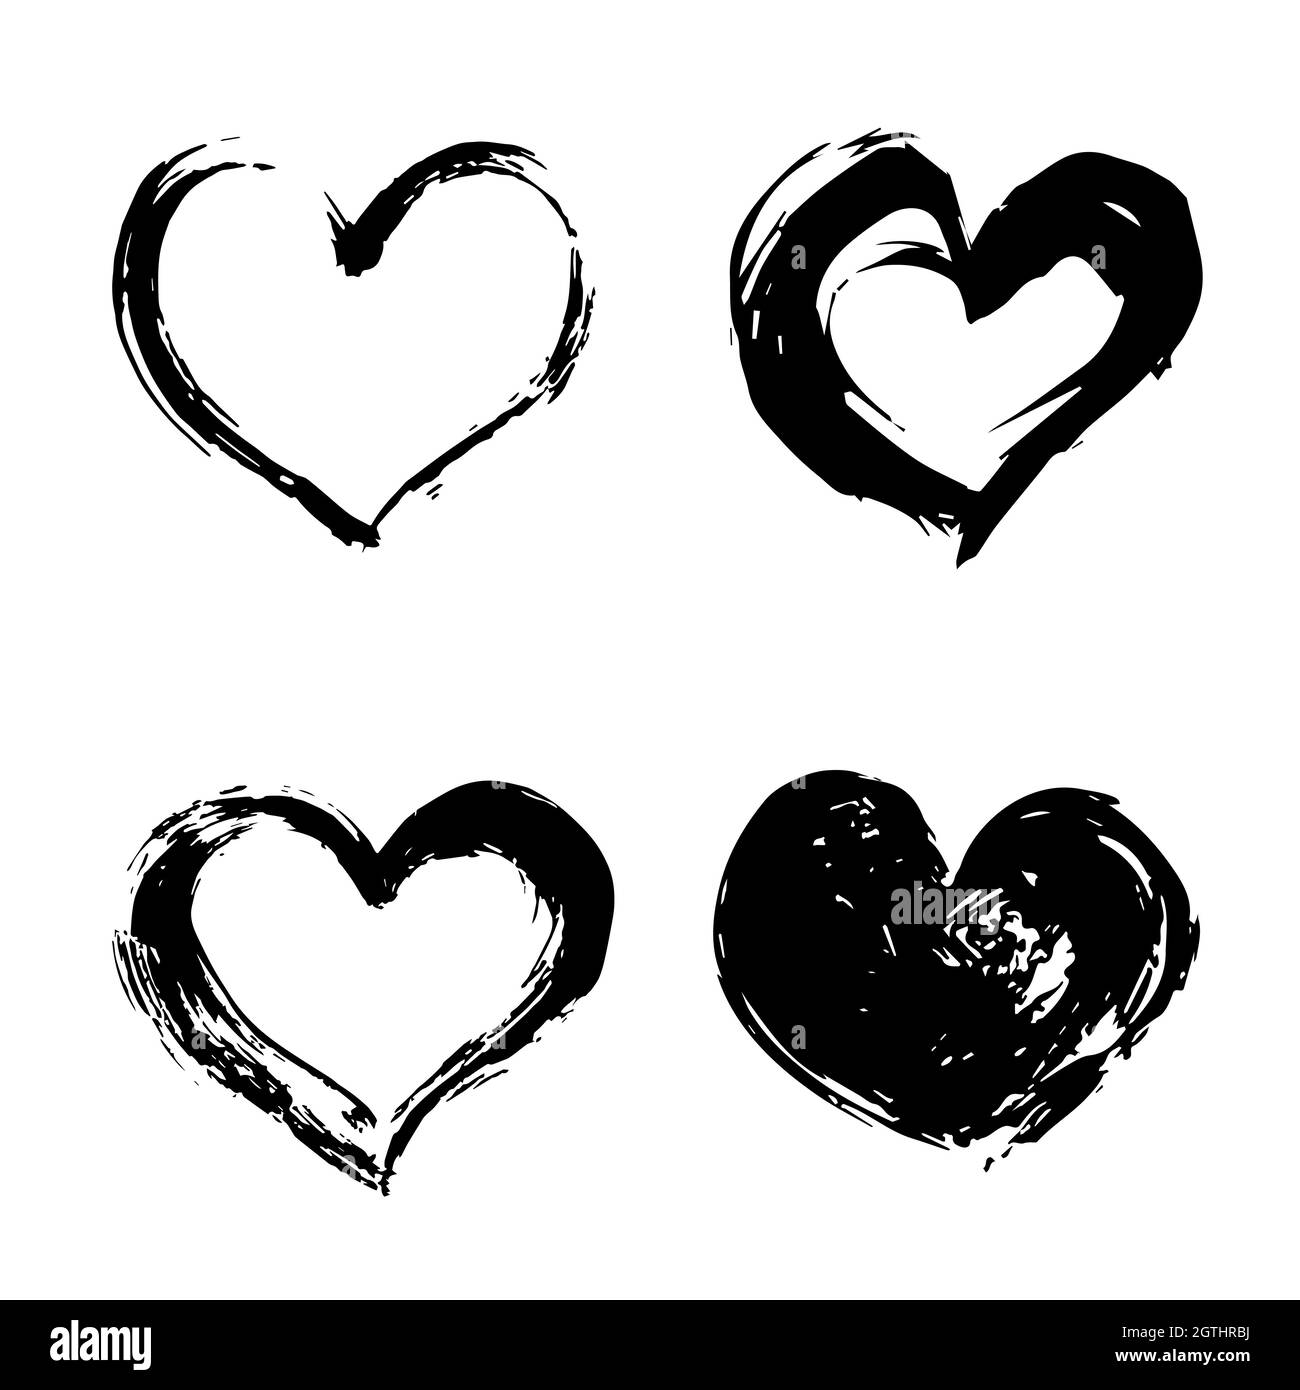 Set of four hand drawn black hearts isolated on white. Grunge heart vector illustration. Rough shapes. Watercolor or acrylic painting effect. Valentin Stock Vector